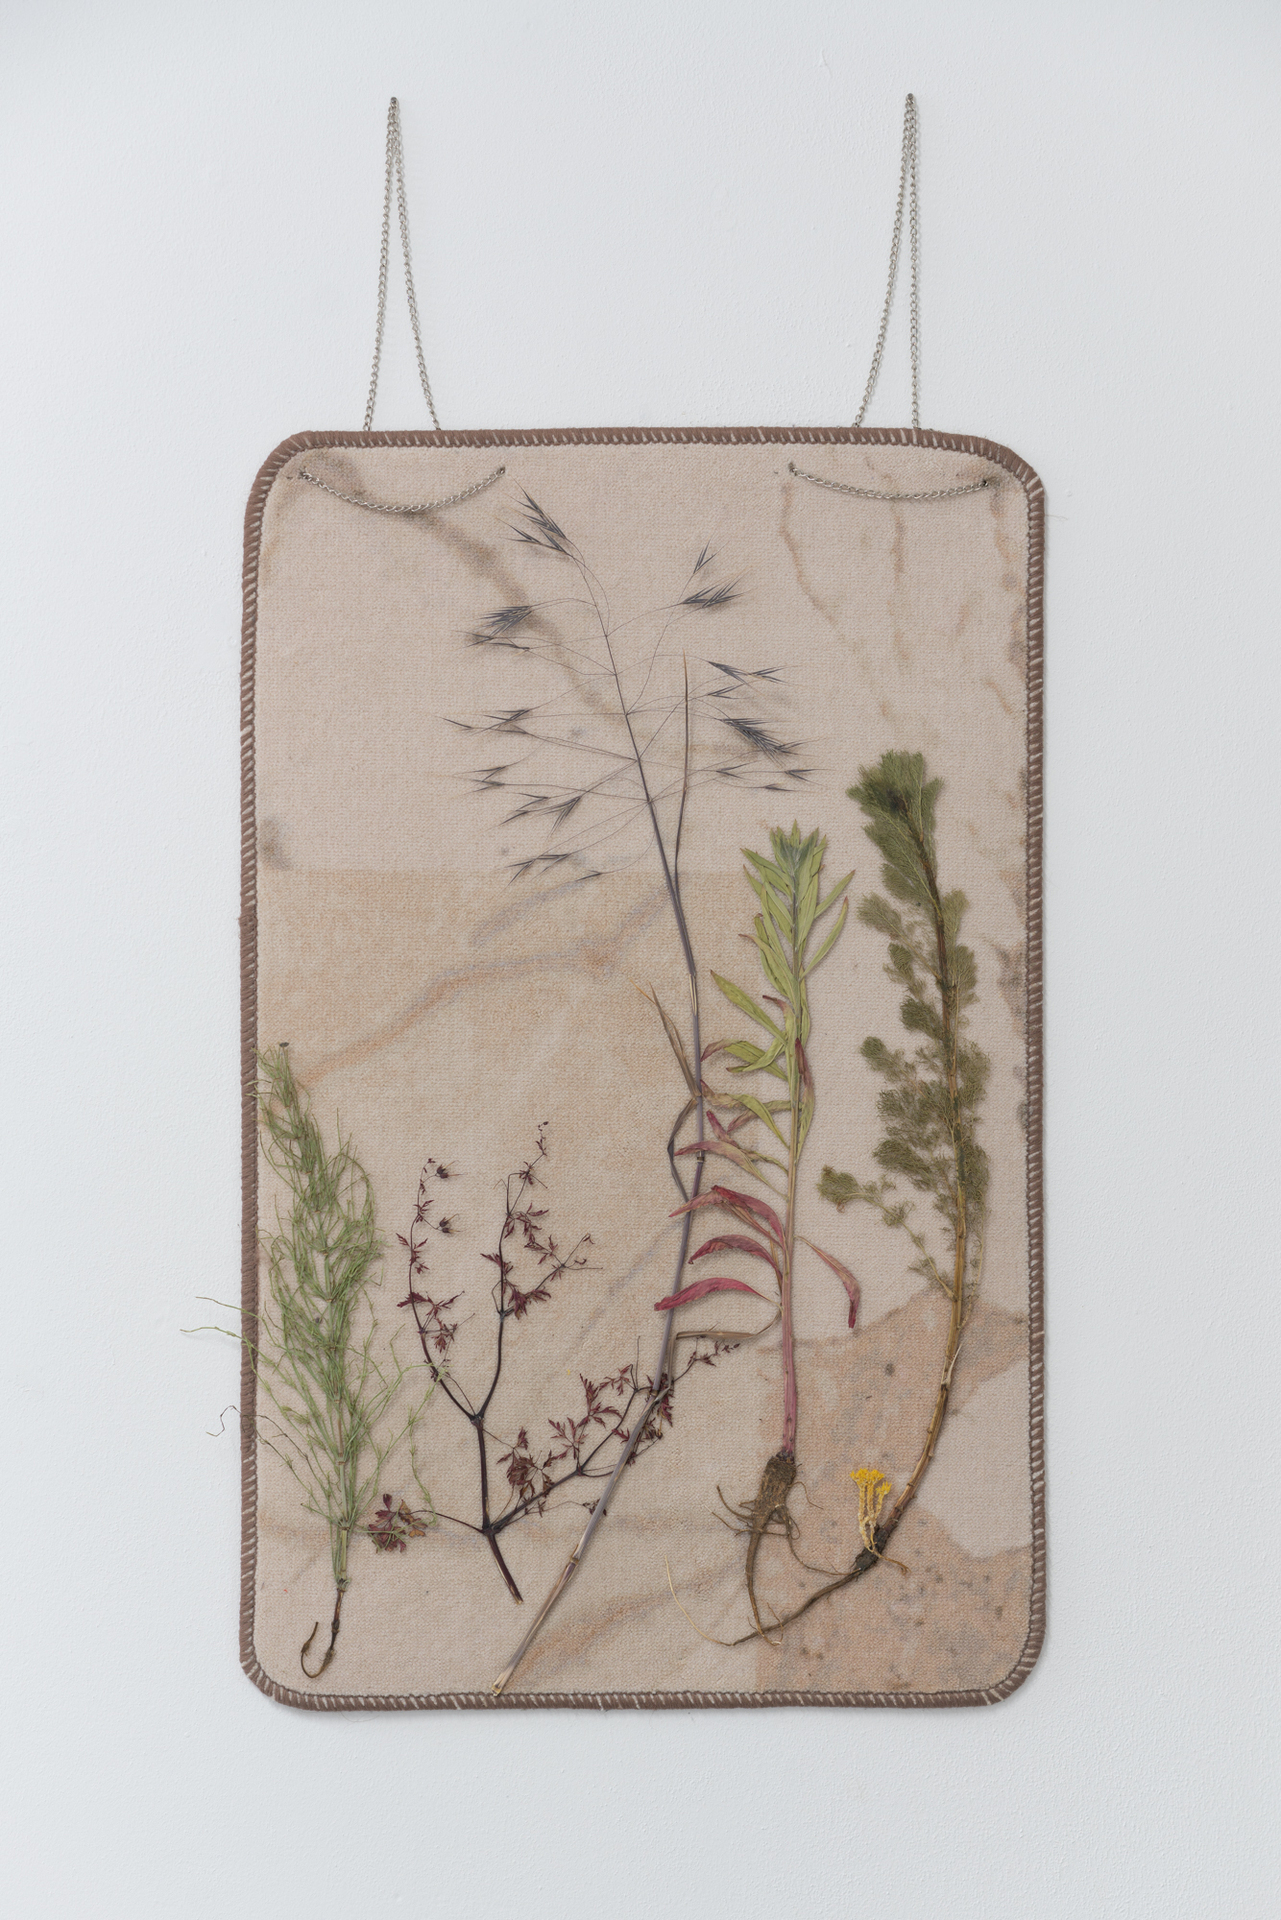 Jakob Forster, A quick burn‘s slow recovery heightened my senses heelwards. O blinded limping joy, 2021, pressed summer plants mounted on bathroom mat, 45 x 80 cm